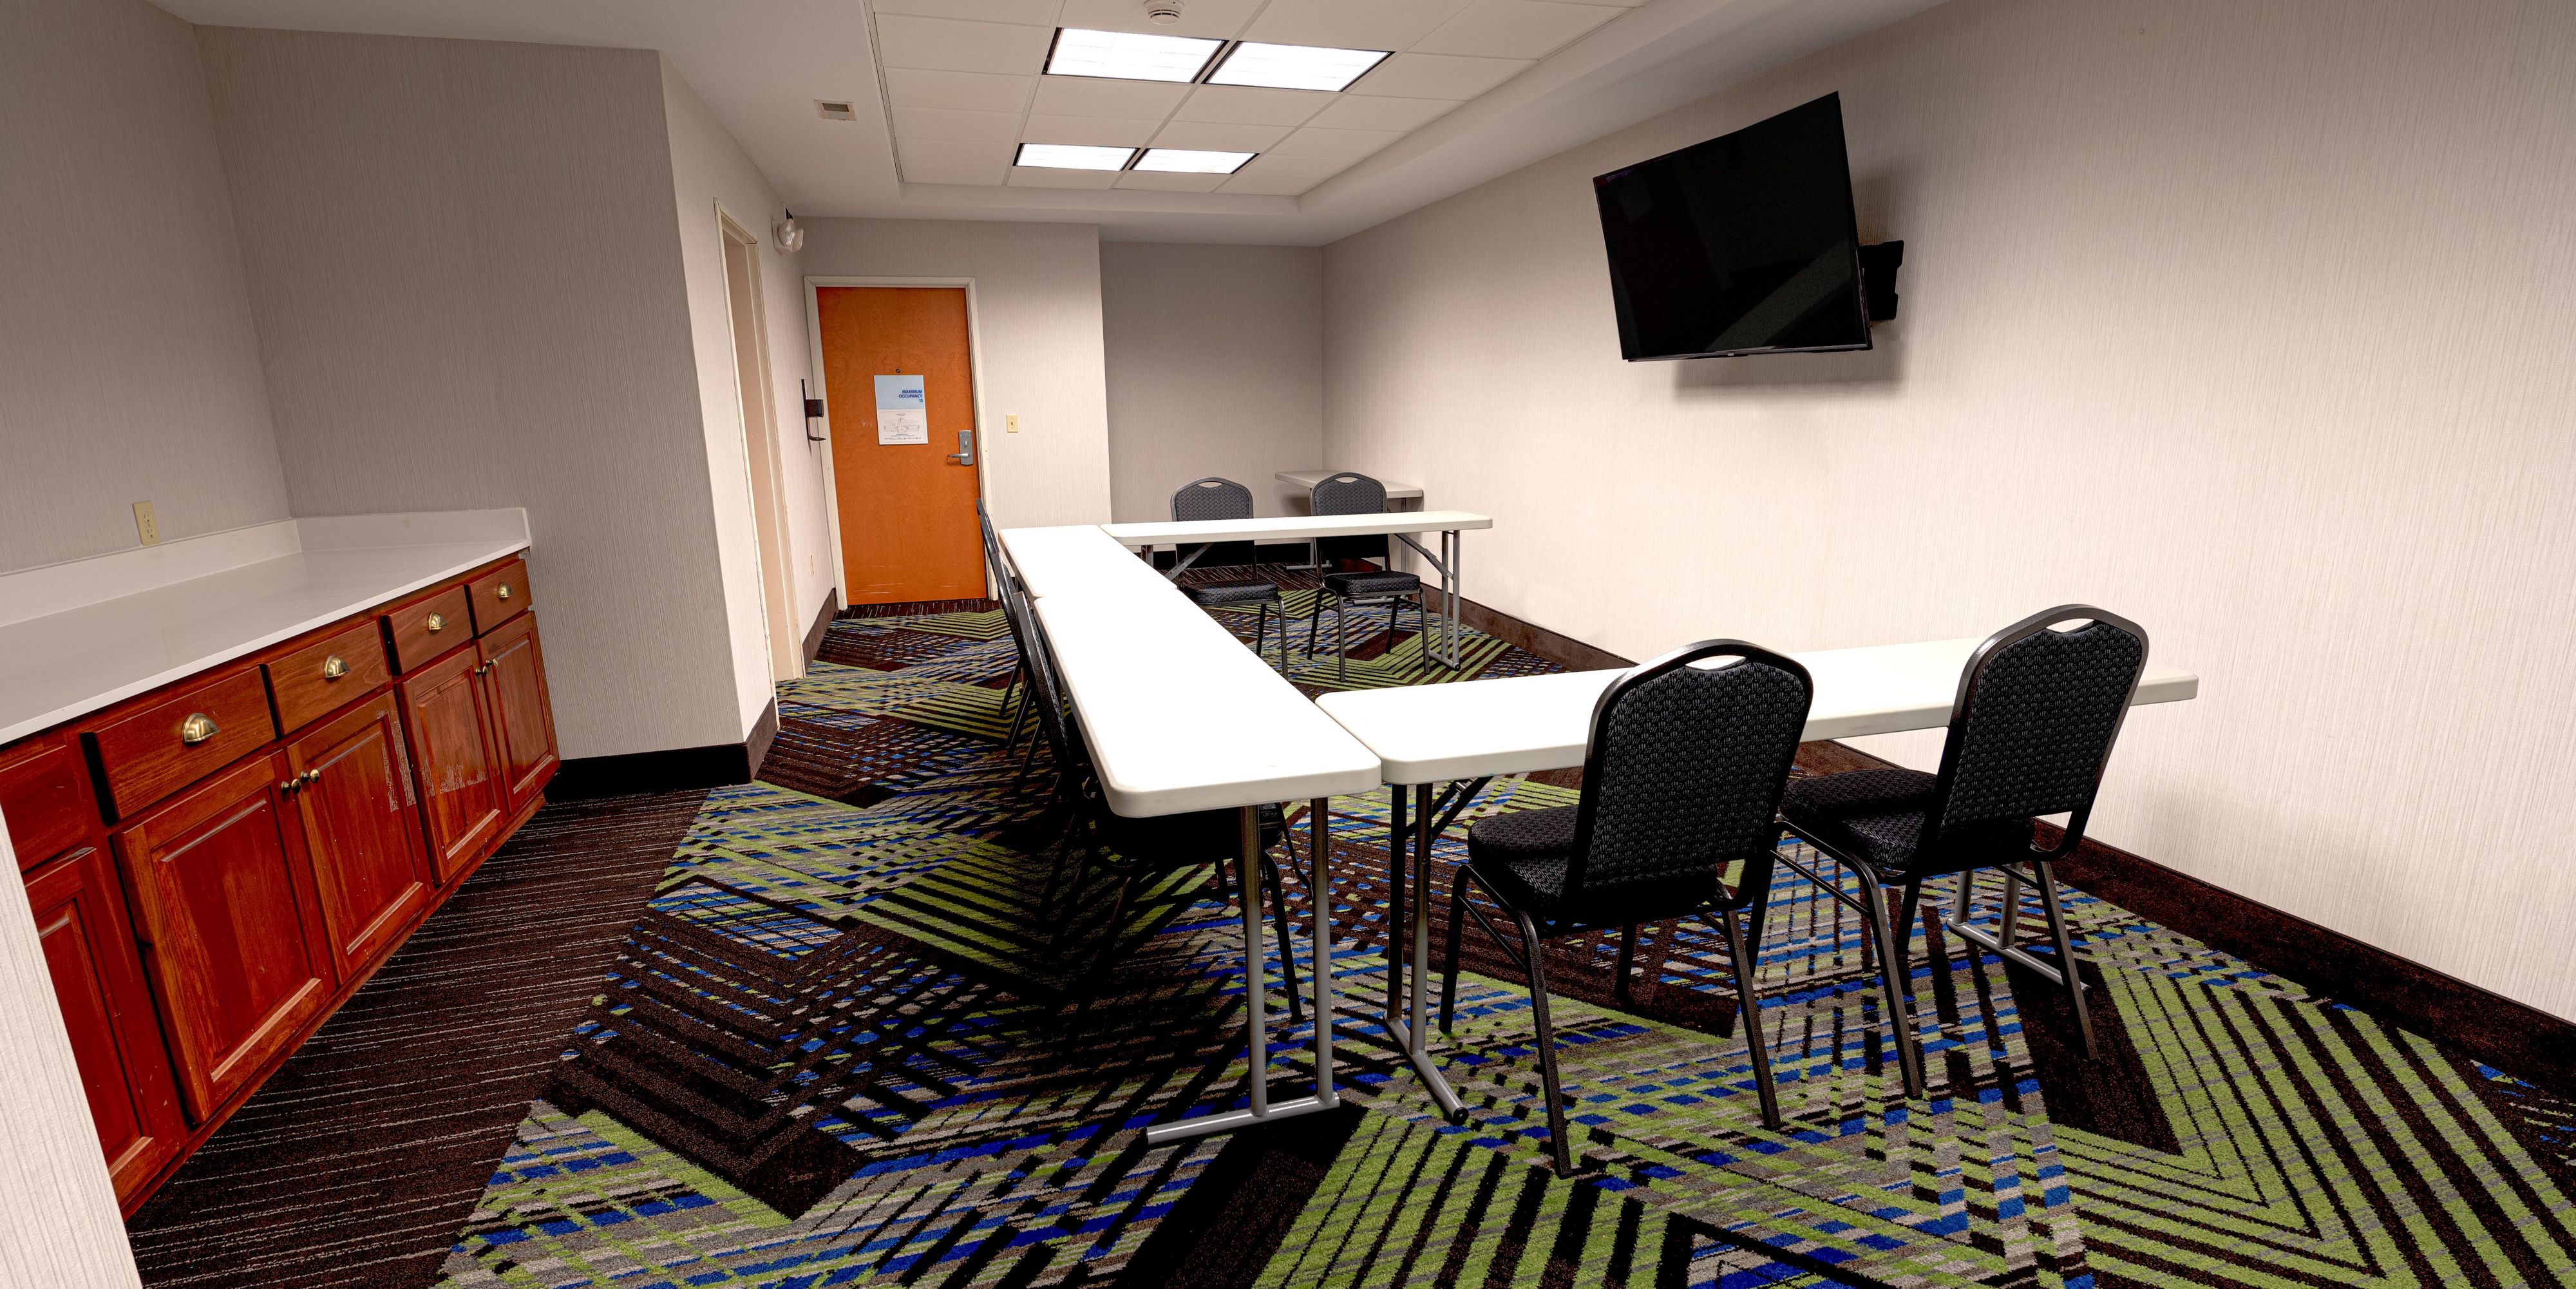 We offer a full renovated meeting area.  300sq feet meeting space with many services available.  Host your next Corporate Meeting just 4 miles from Michigan Capital. Group Room rates and packages available. 